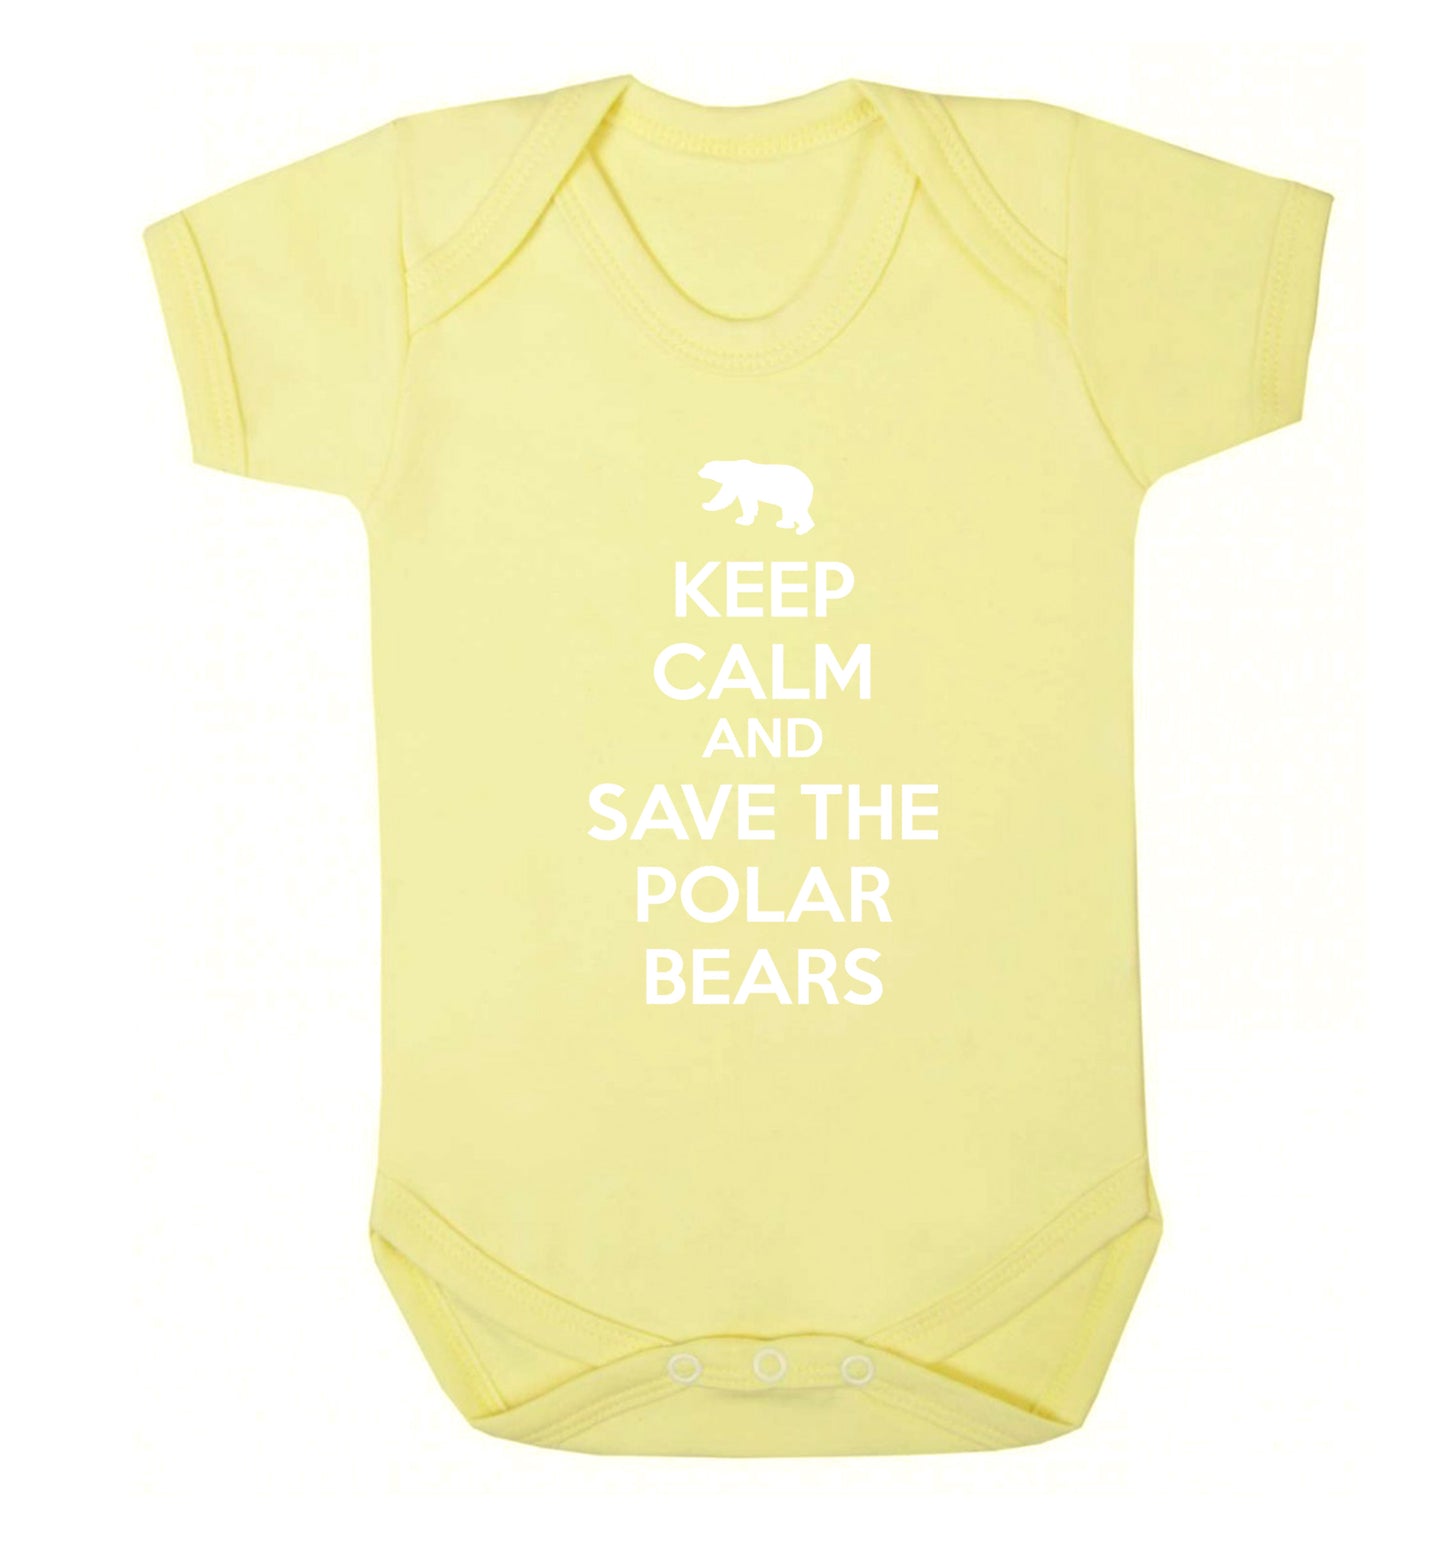 Keep calm and save the polar bears Baby Vest pale yellow 18-24 months